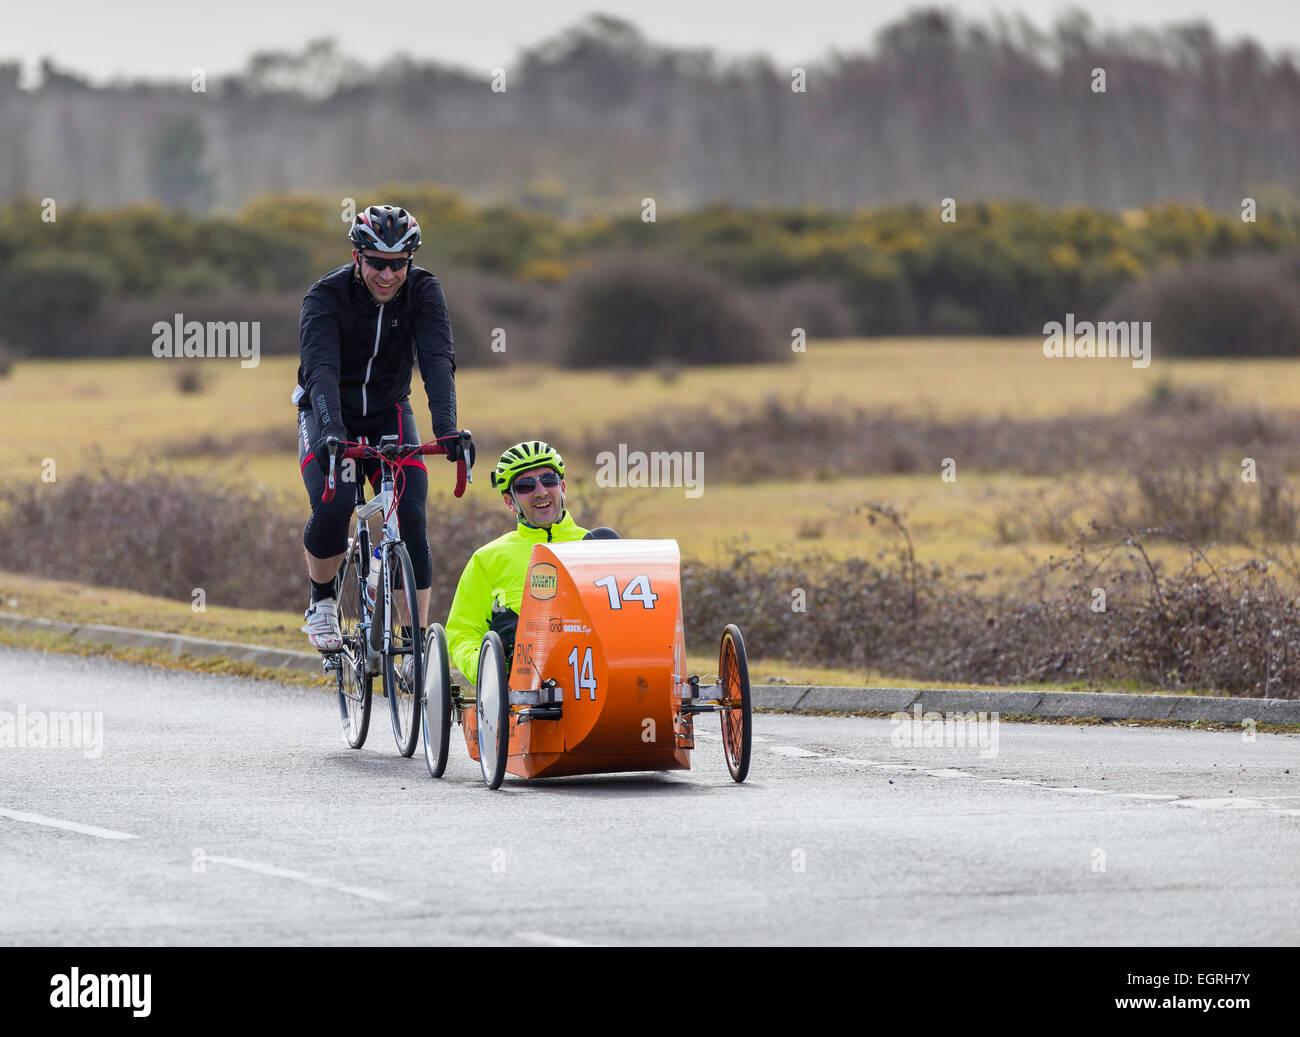 Two cyclists, one uses a conventional bicycle, the other, in a high vis jacket, is testing a recumbent prototype cycle. Stock Photo